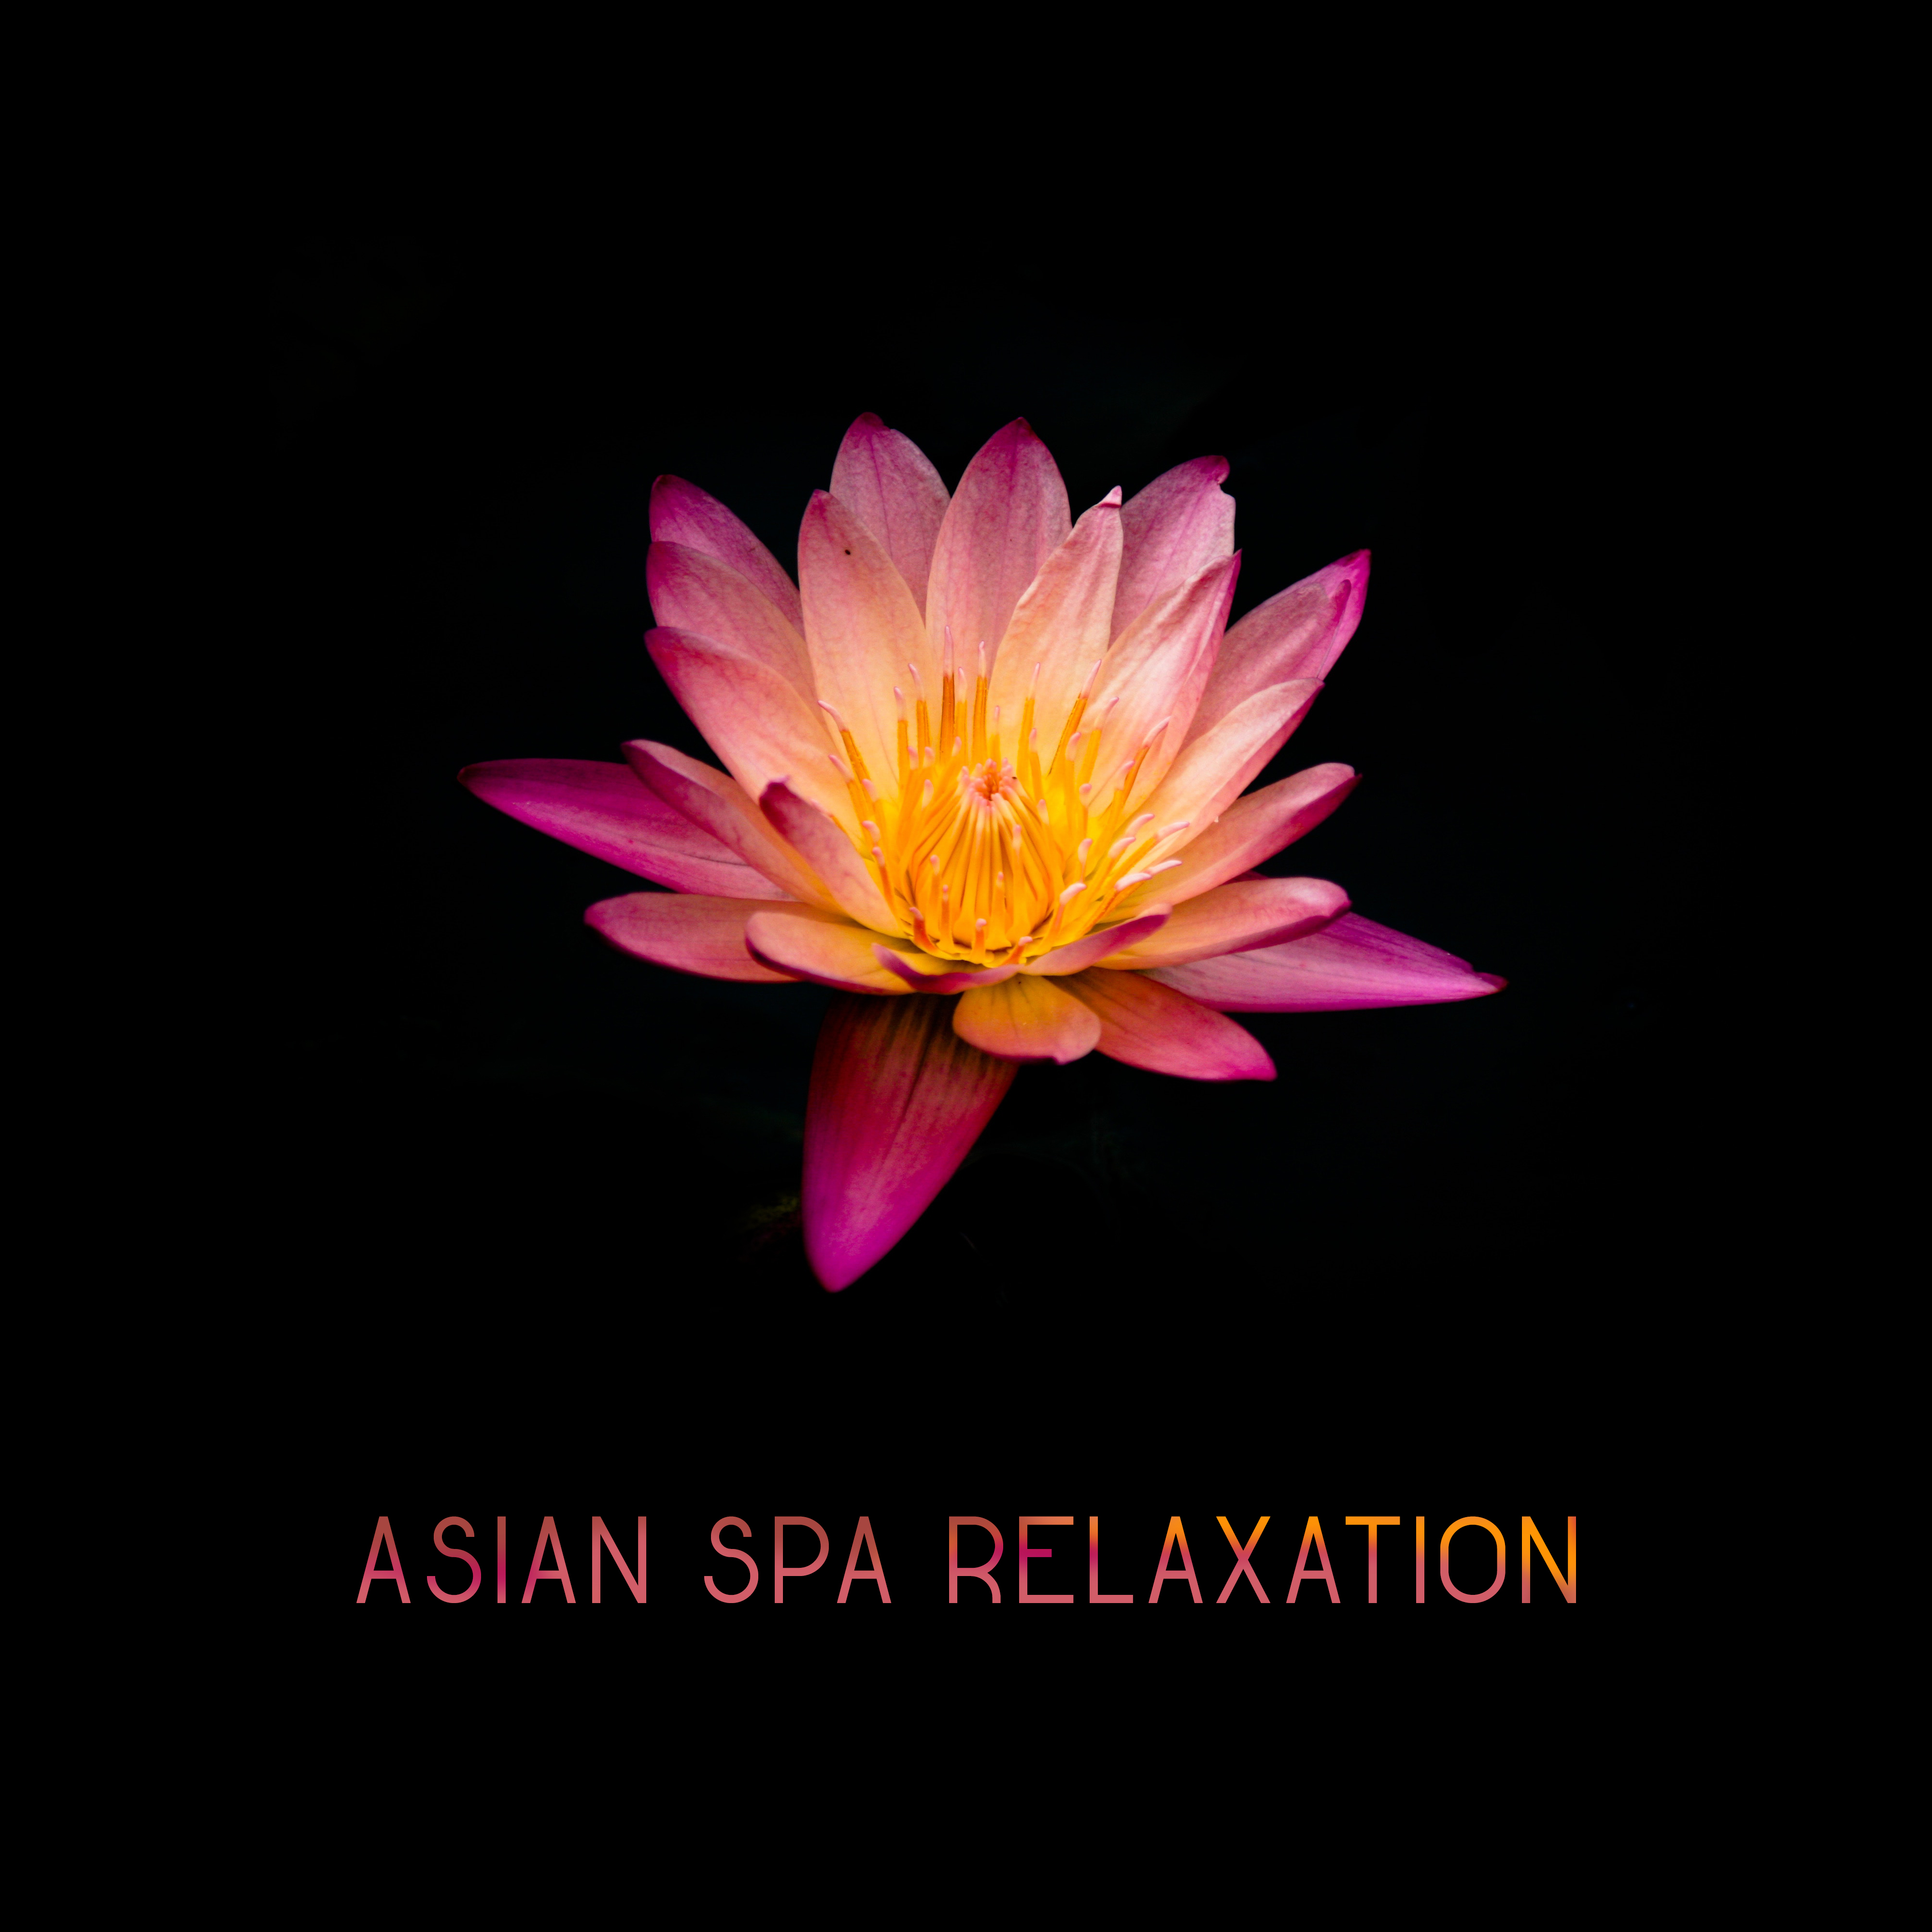 Asian Spa Relaxation  Calming Music for Spa, Hotel Relaxation, Soft Sounds, Hot Stone Massage